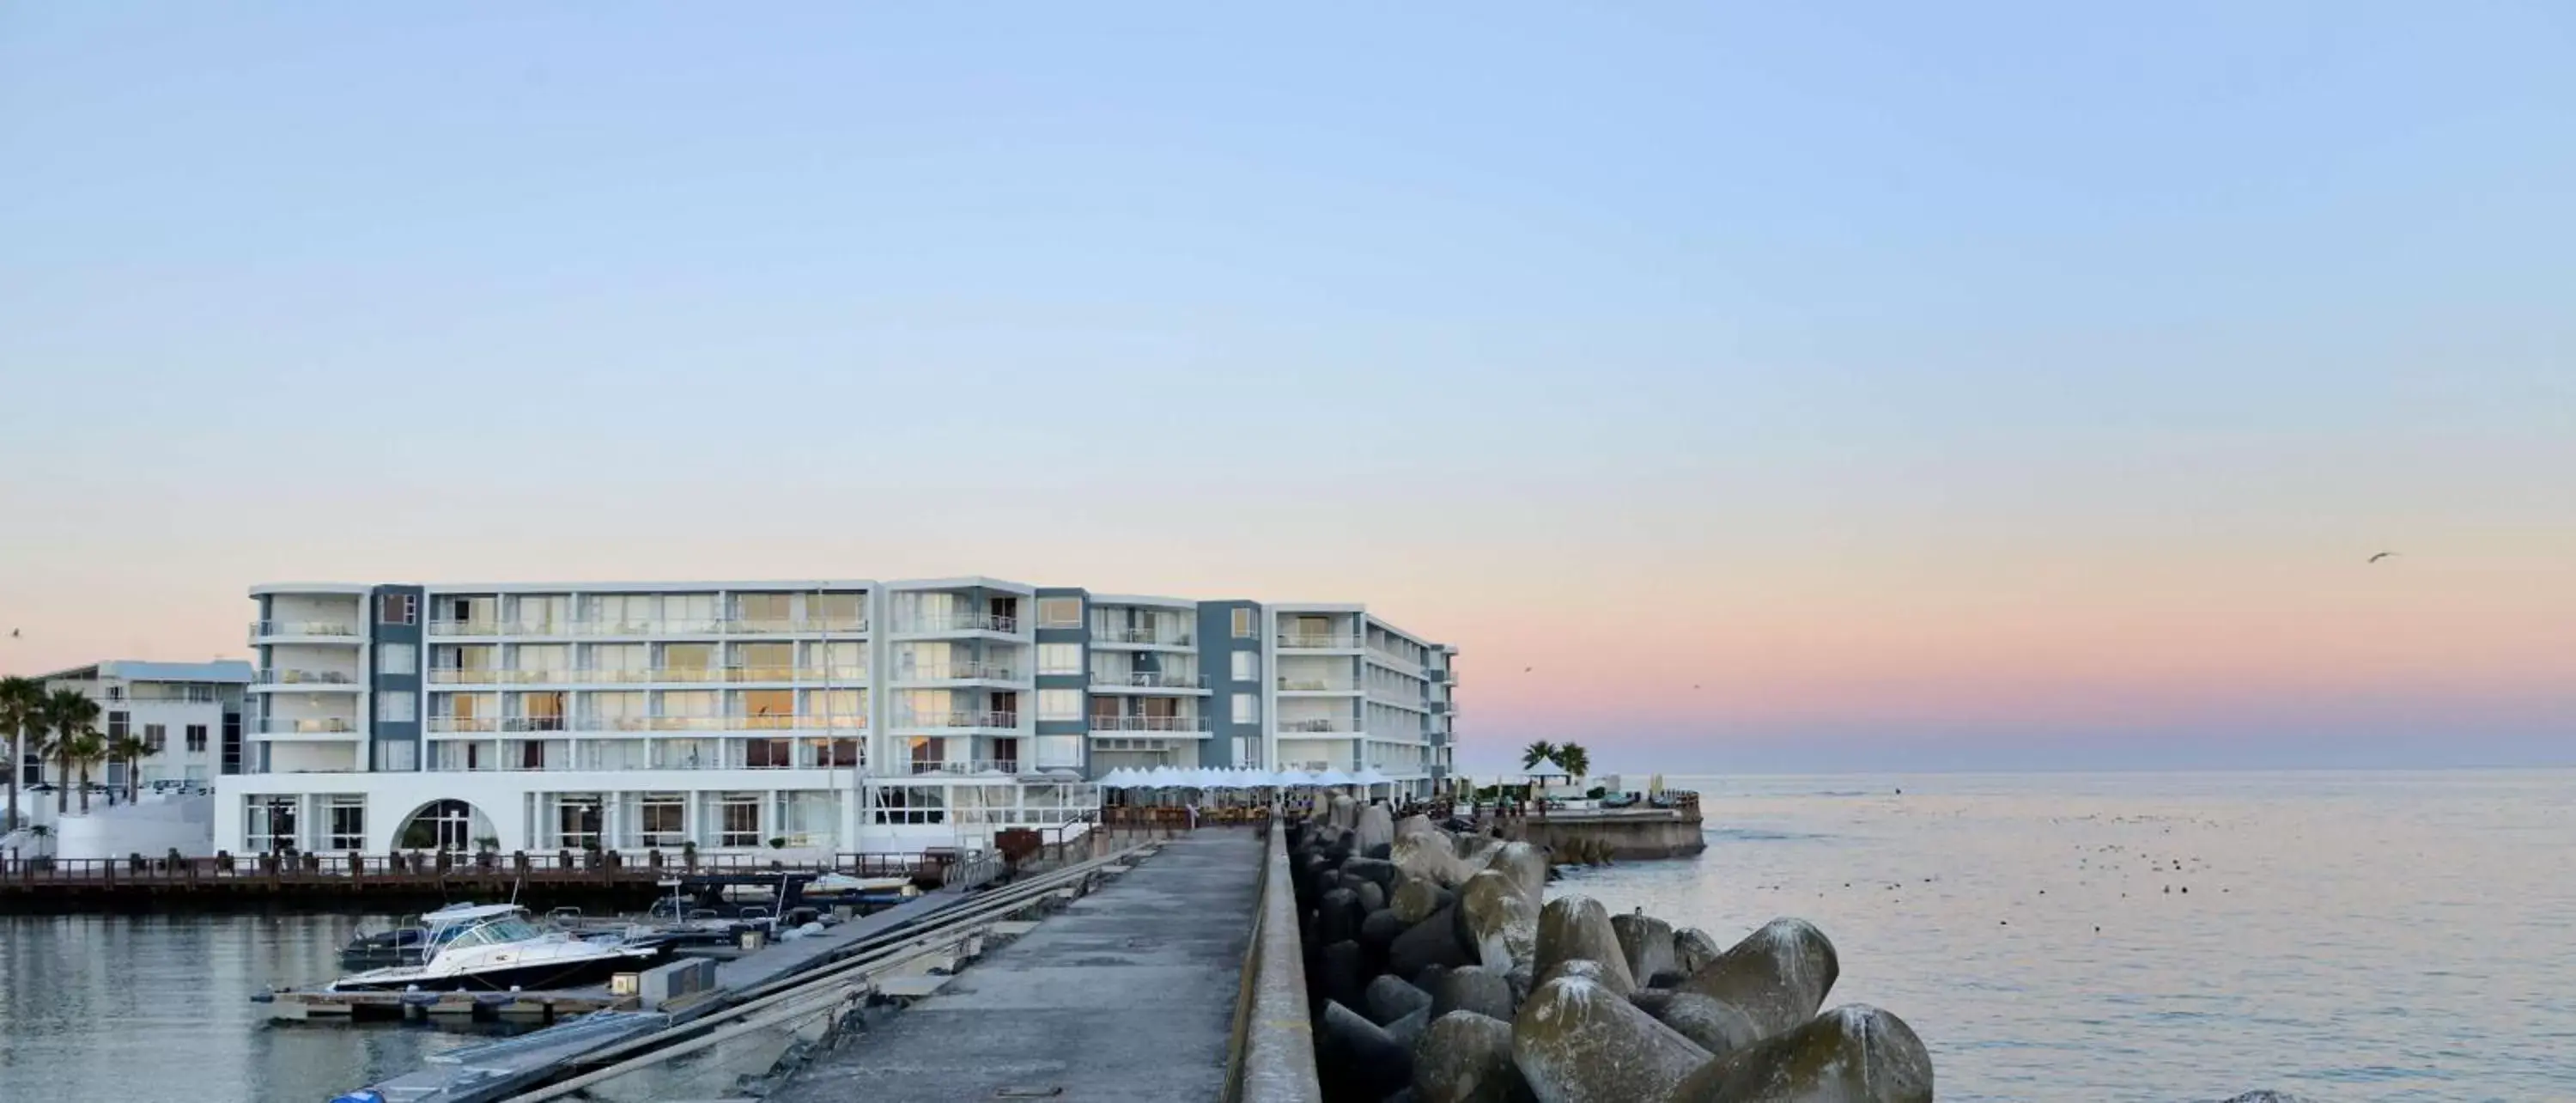 Property building in Radisson Blu Hotel Waterfront, Cape Town